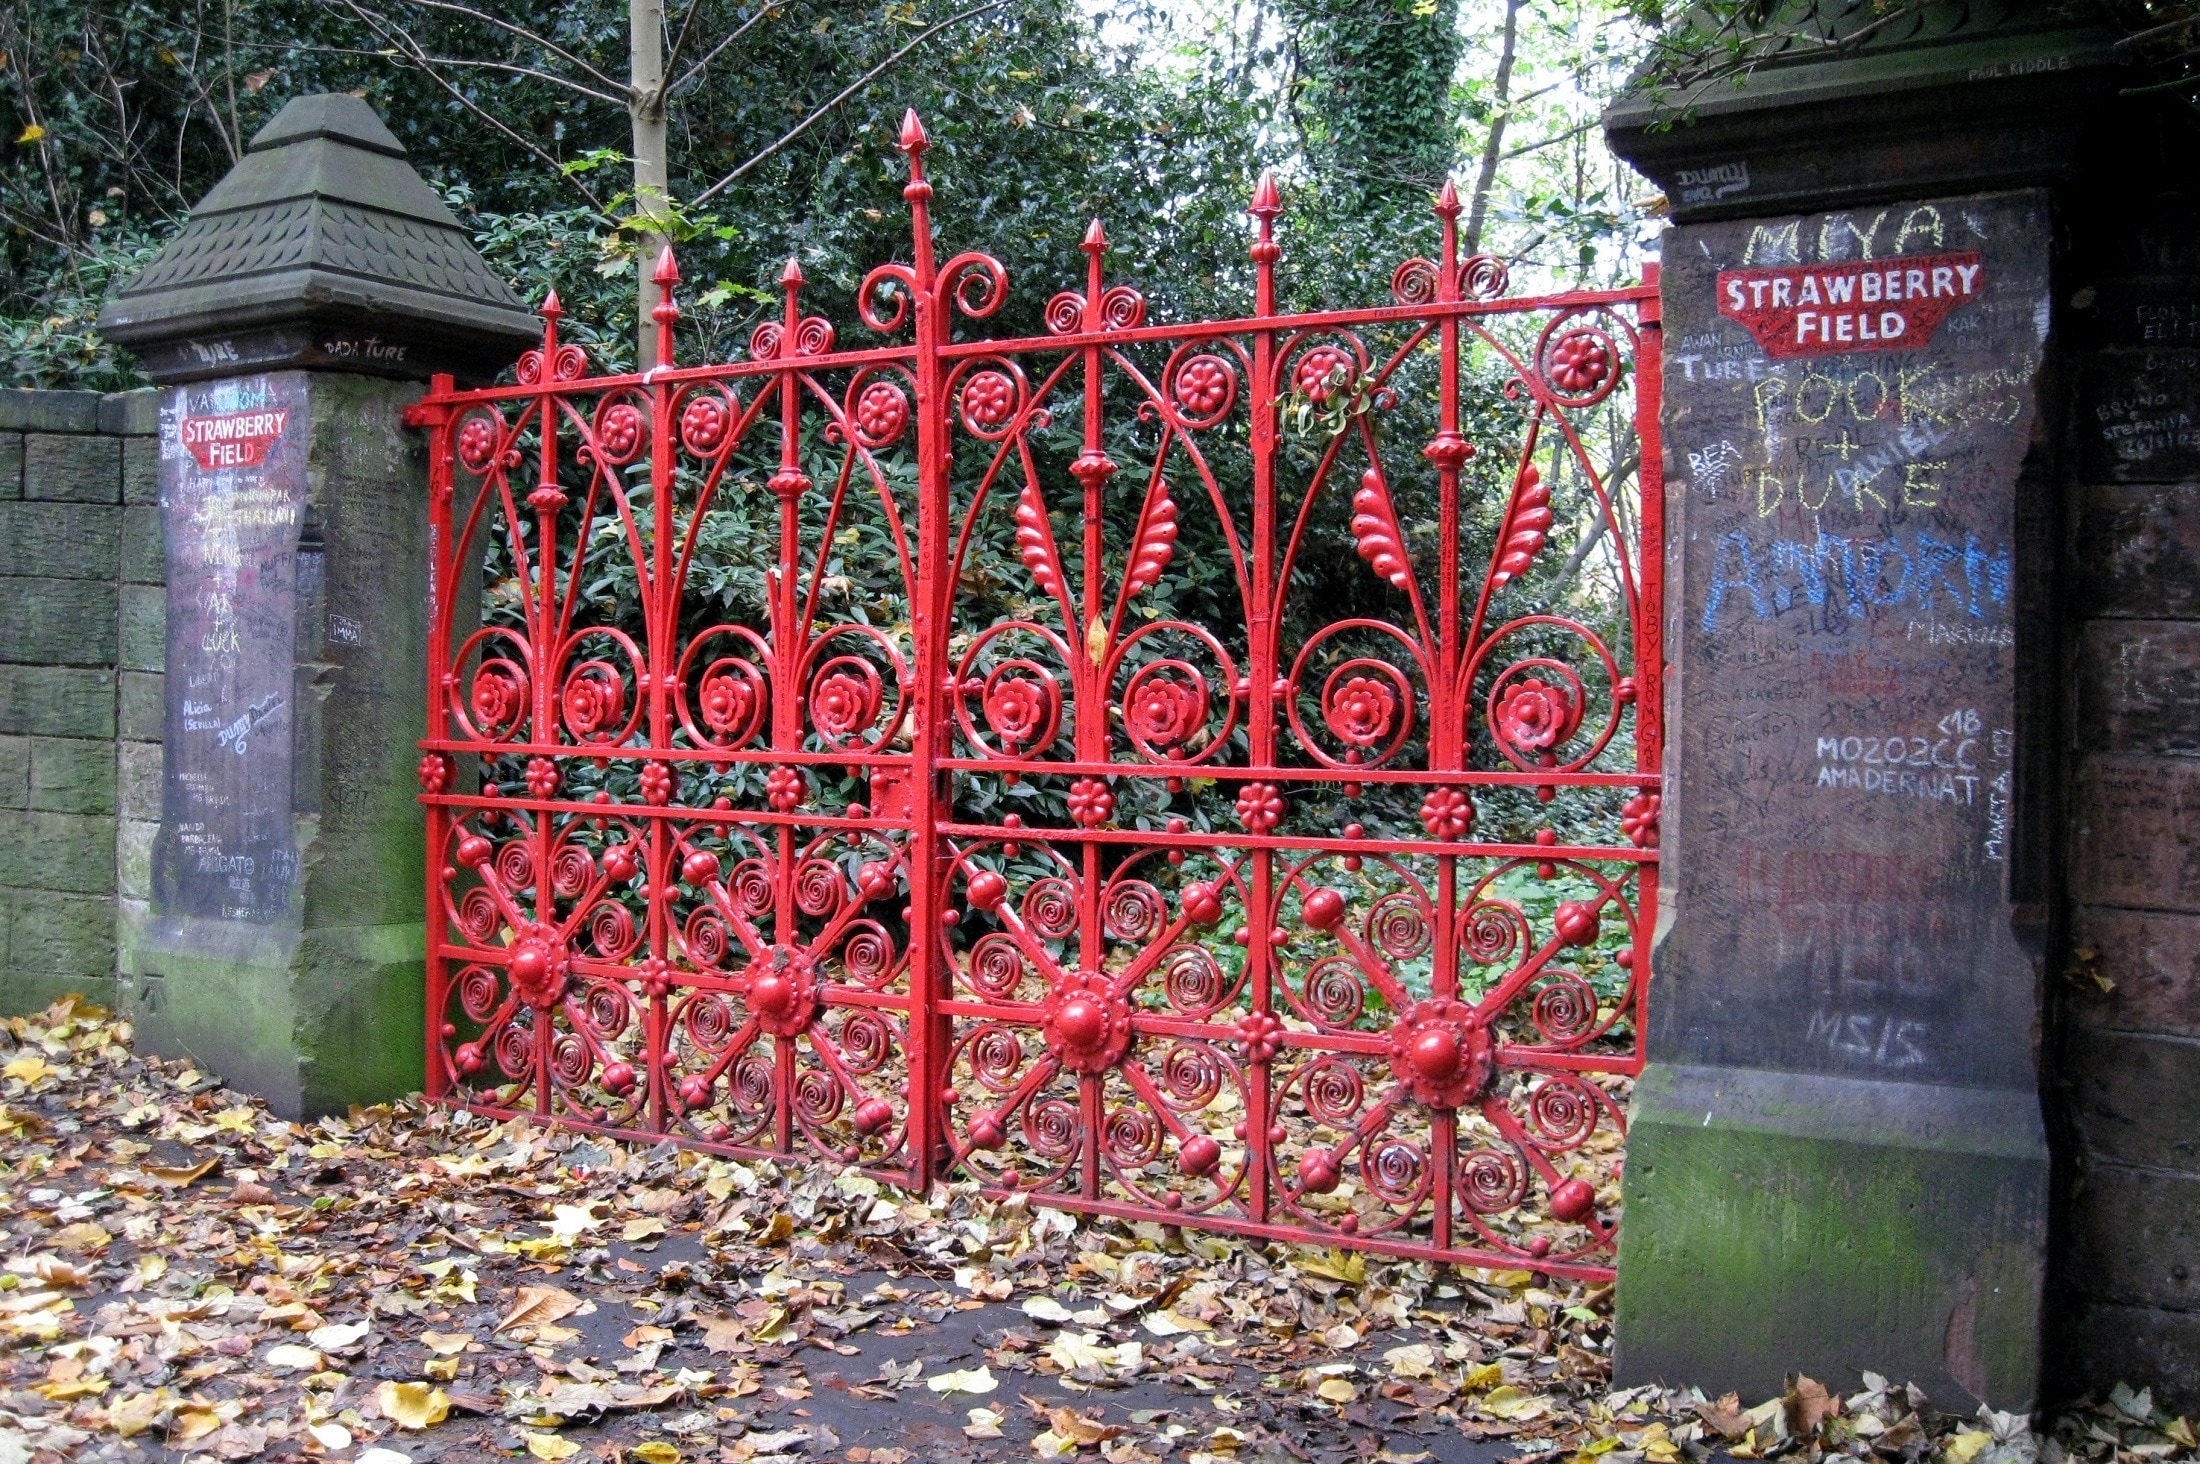 red metal fence